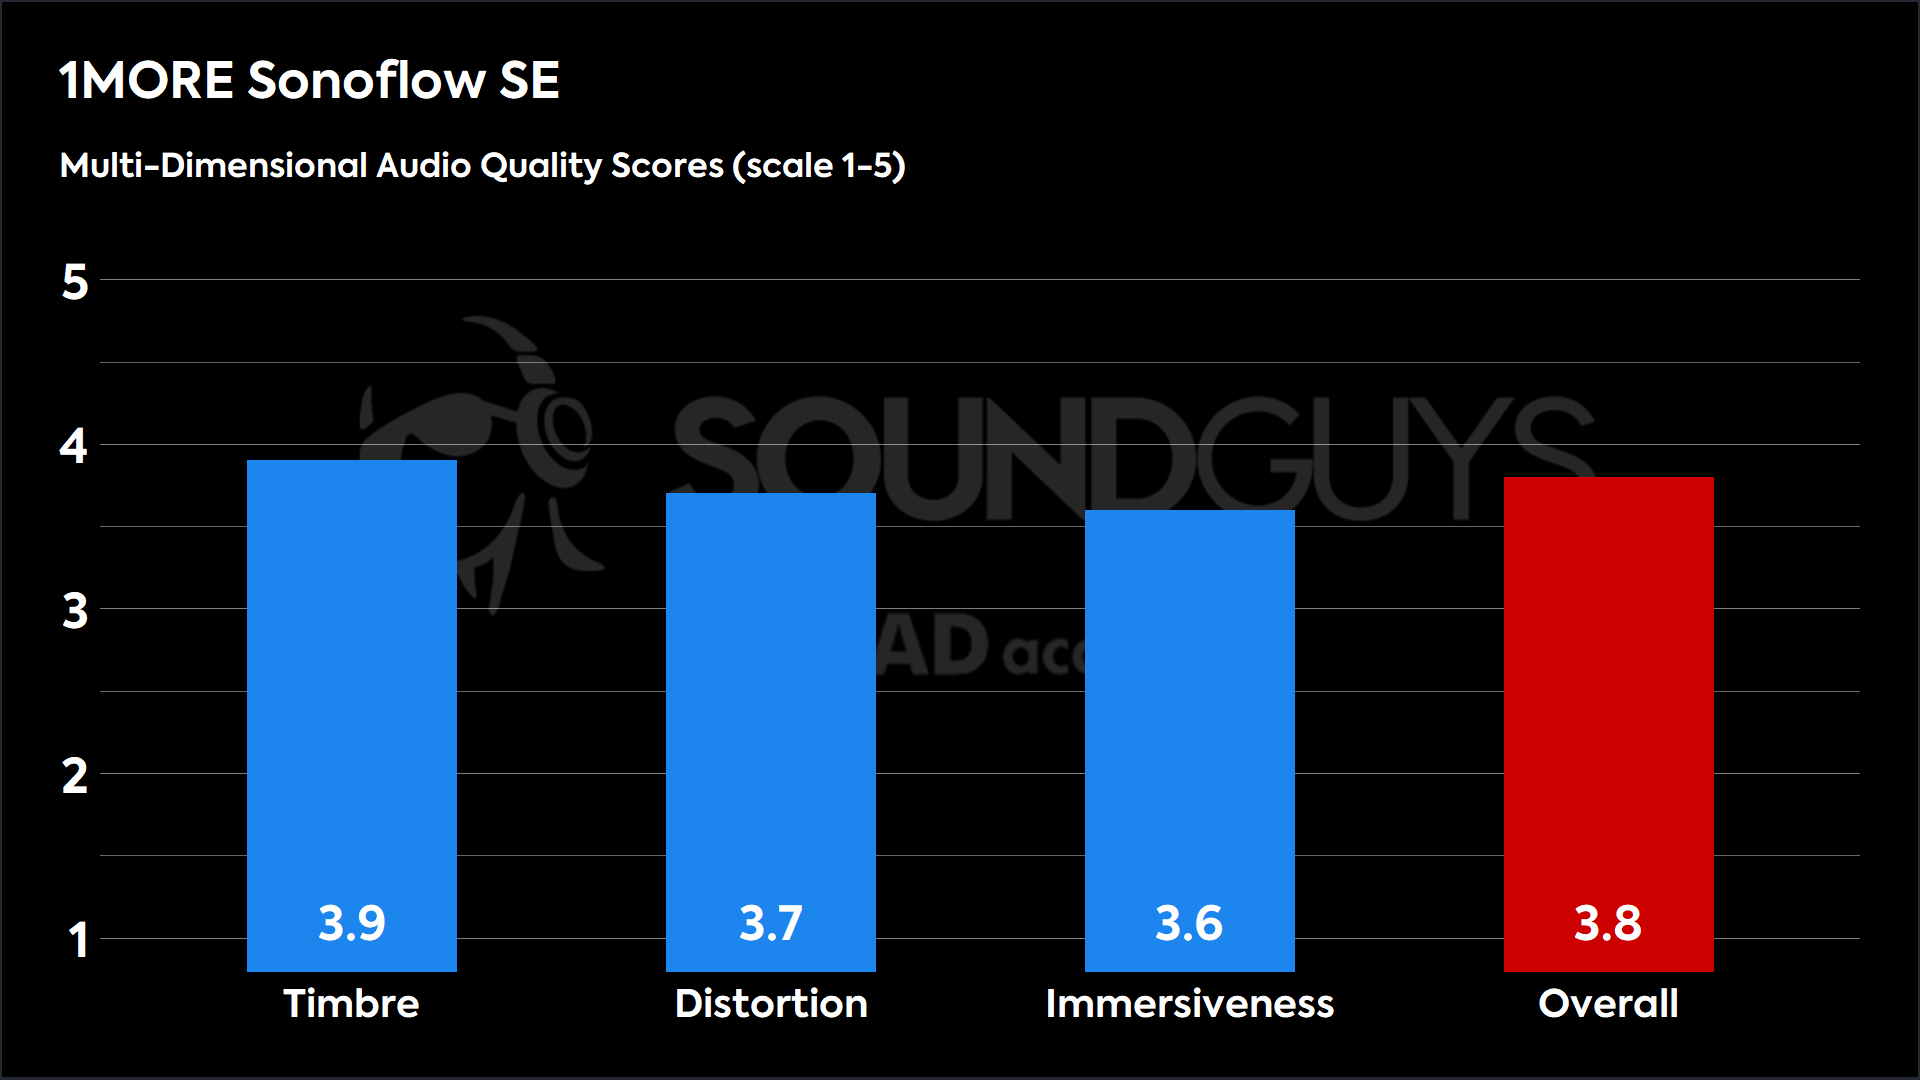 This chart shows the MDAQS results for the 1MORE Sonoflow SE . The Timbre score is 3.9, The Distortion score is 3.7, the Immersiveness score is 3.6, and the Overall Score is 3.8 )